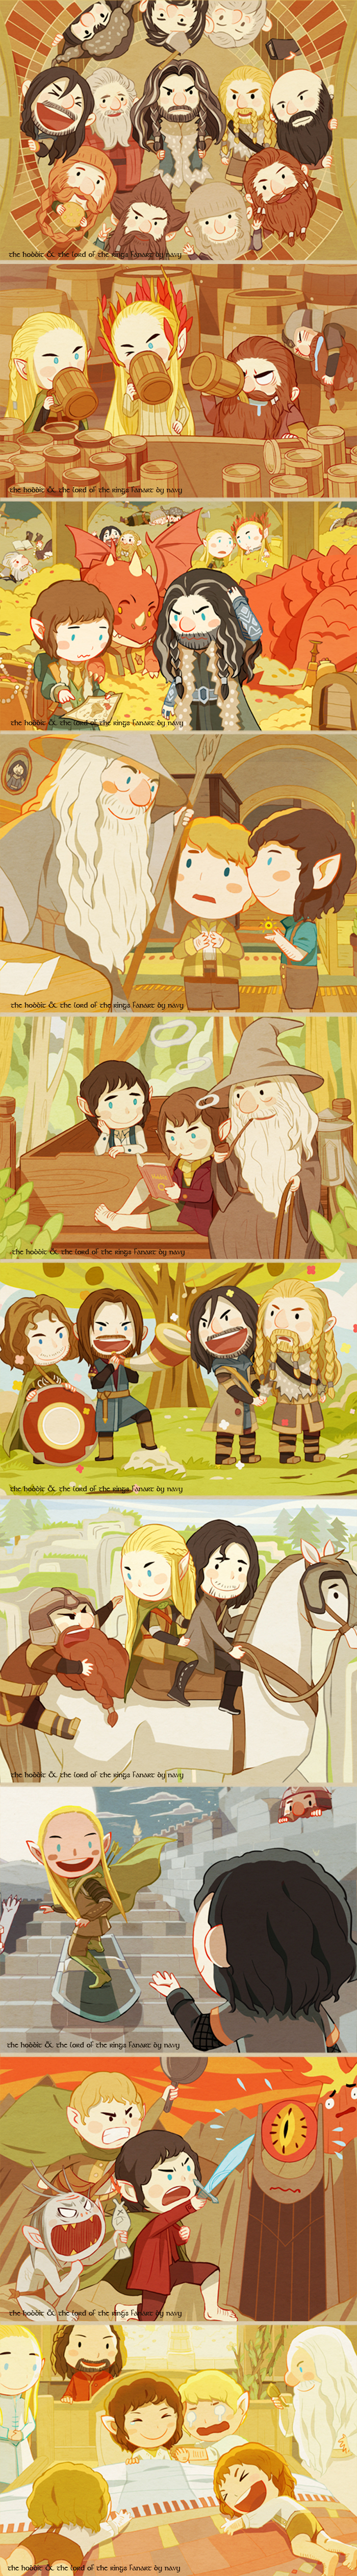 little LotR and tH by navy-locked